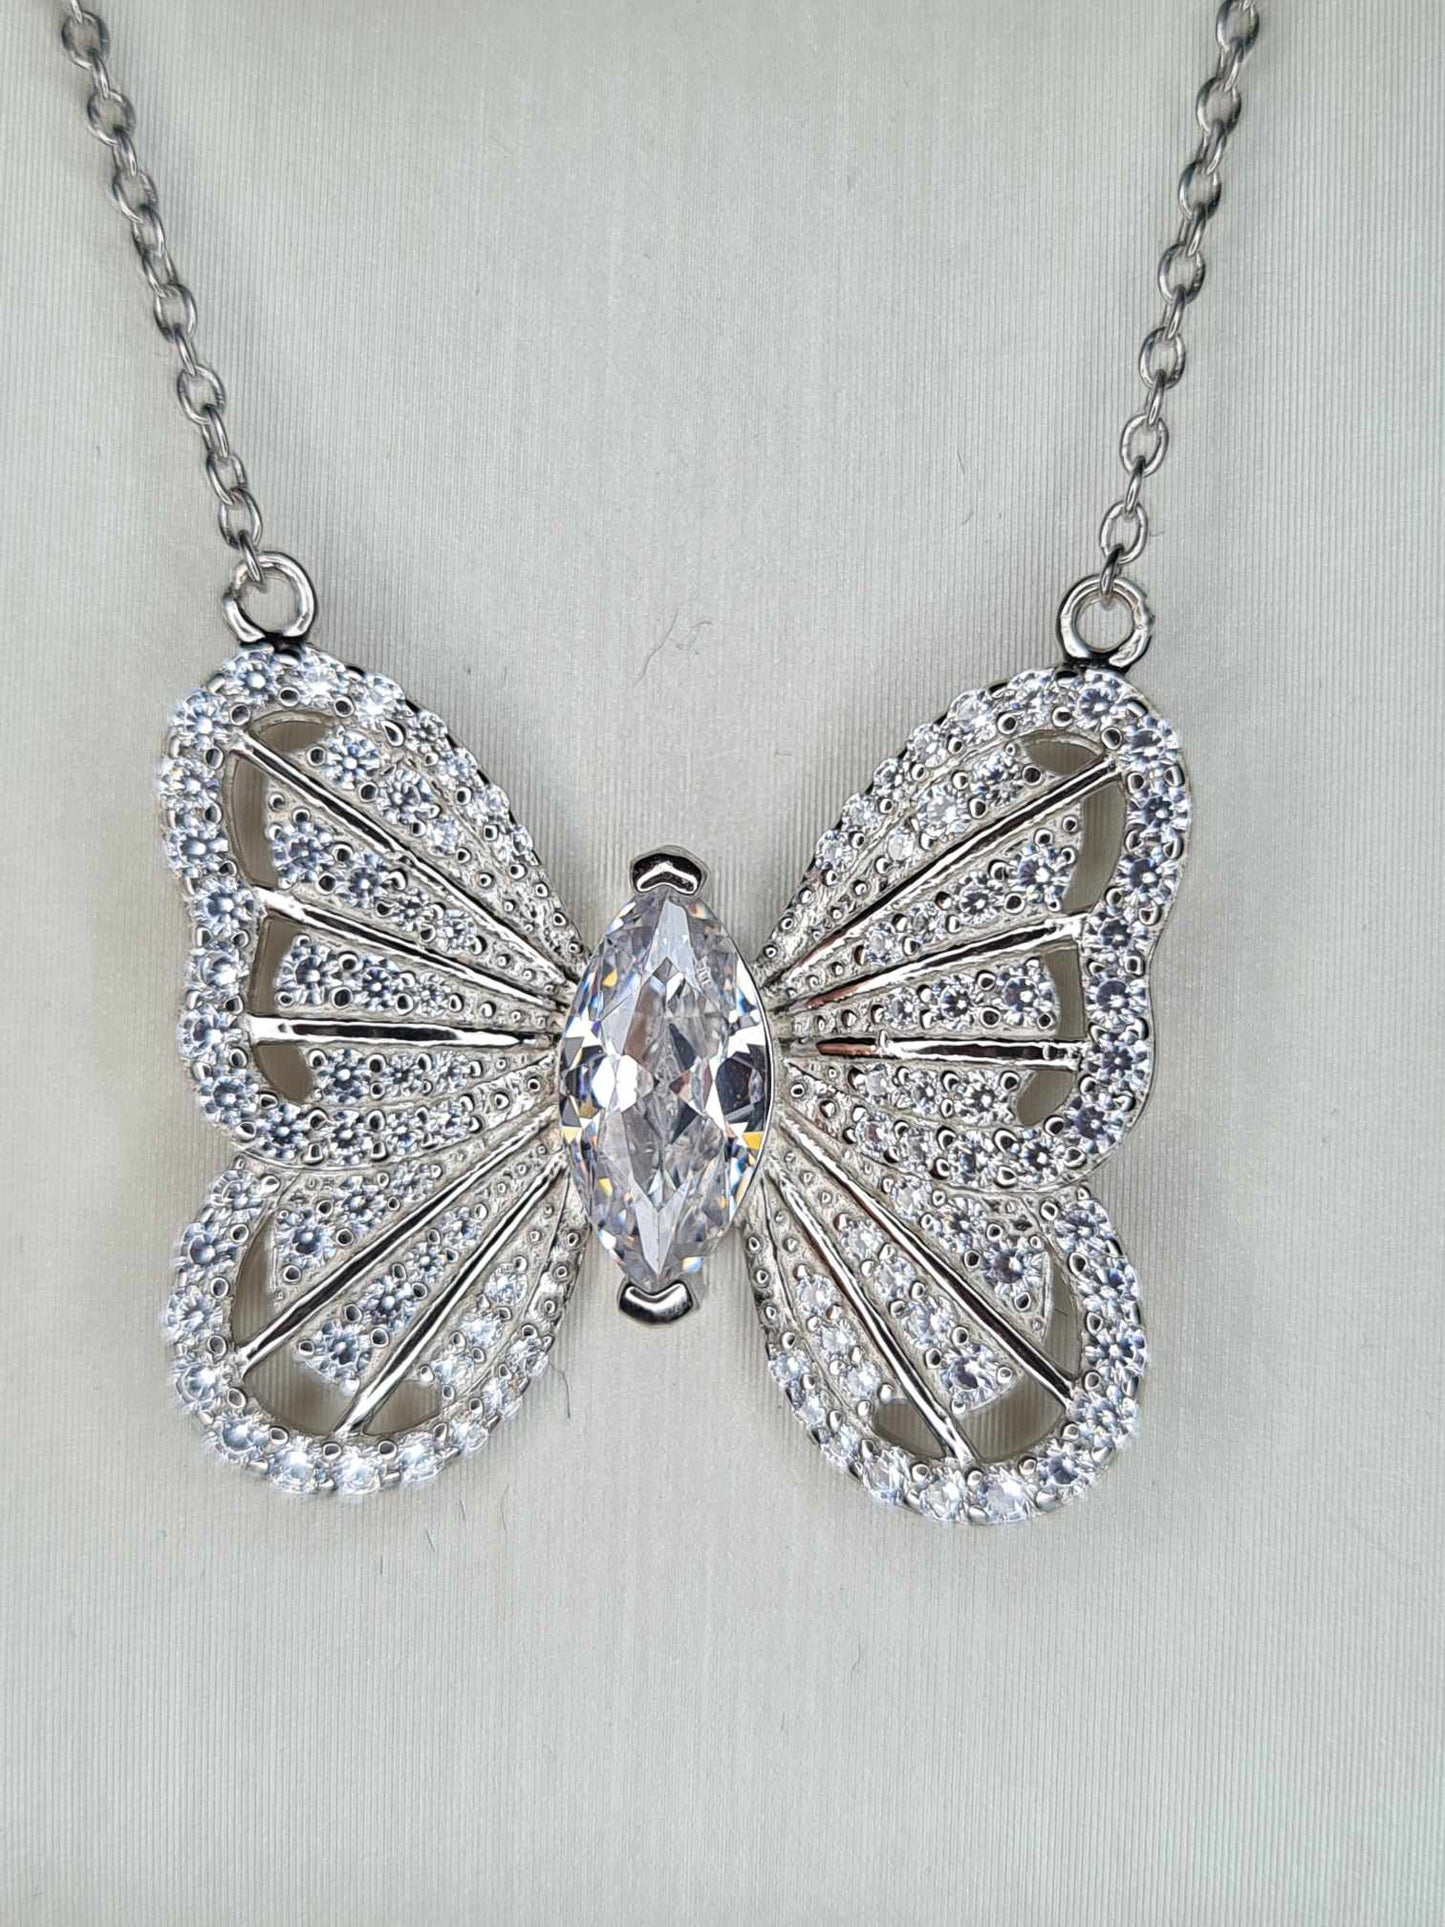 3.180ct. Cubic Zirconia Butterfly Necklace 925 sterling silver with  Rhodium Overlay